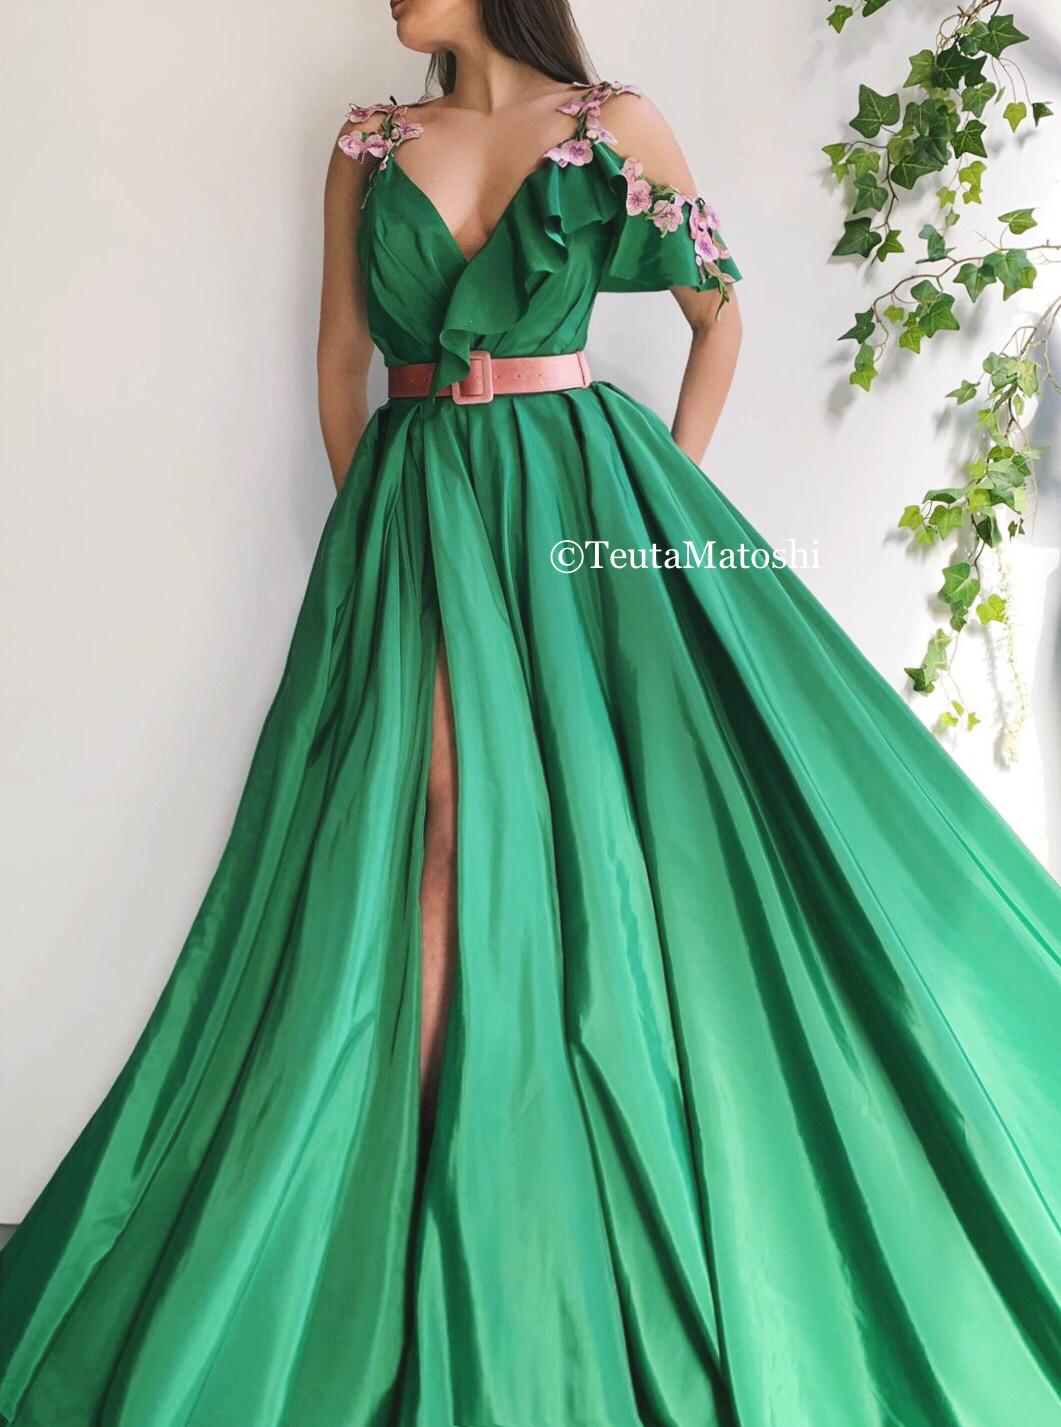 Green A-Line dress with one off the shoulder sleeve, straps, belt and embroidery